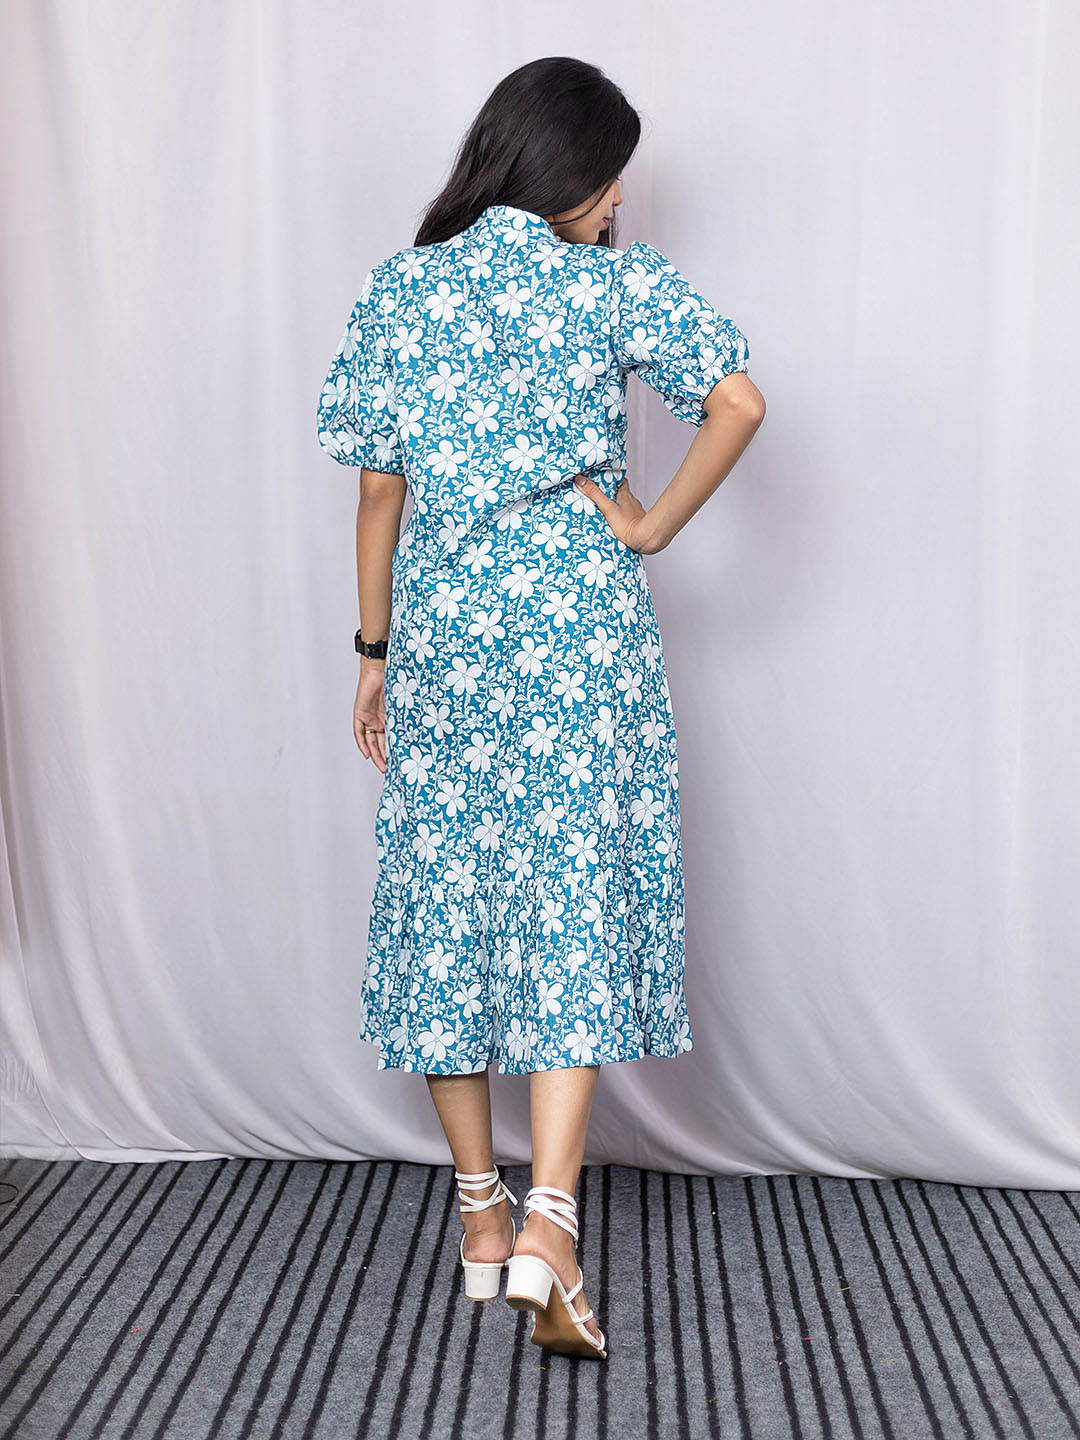 BLUE WITH WHITE FLOWER PRINT Dress